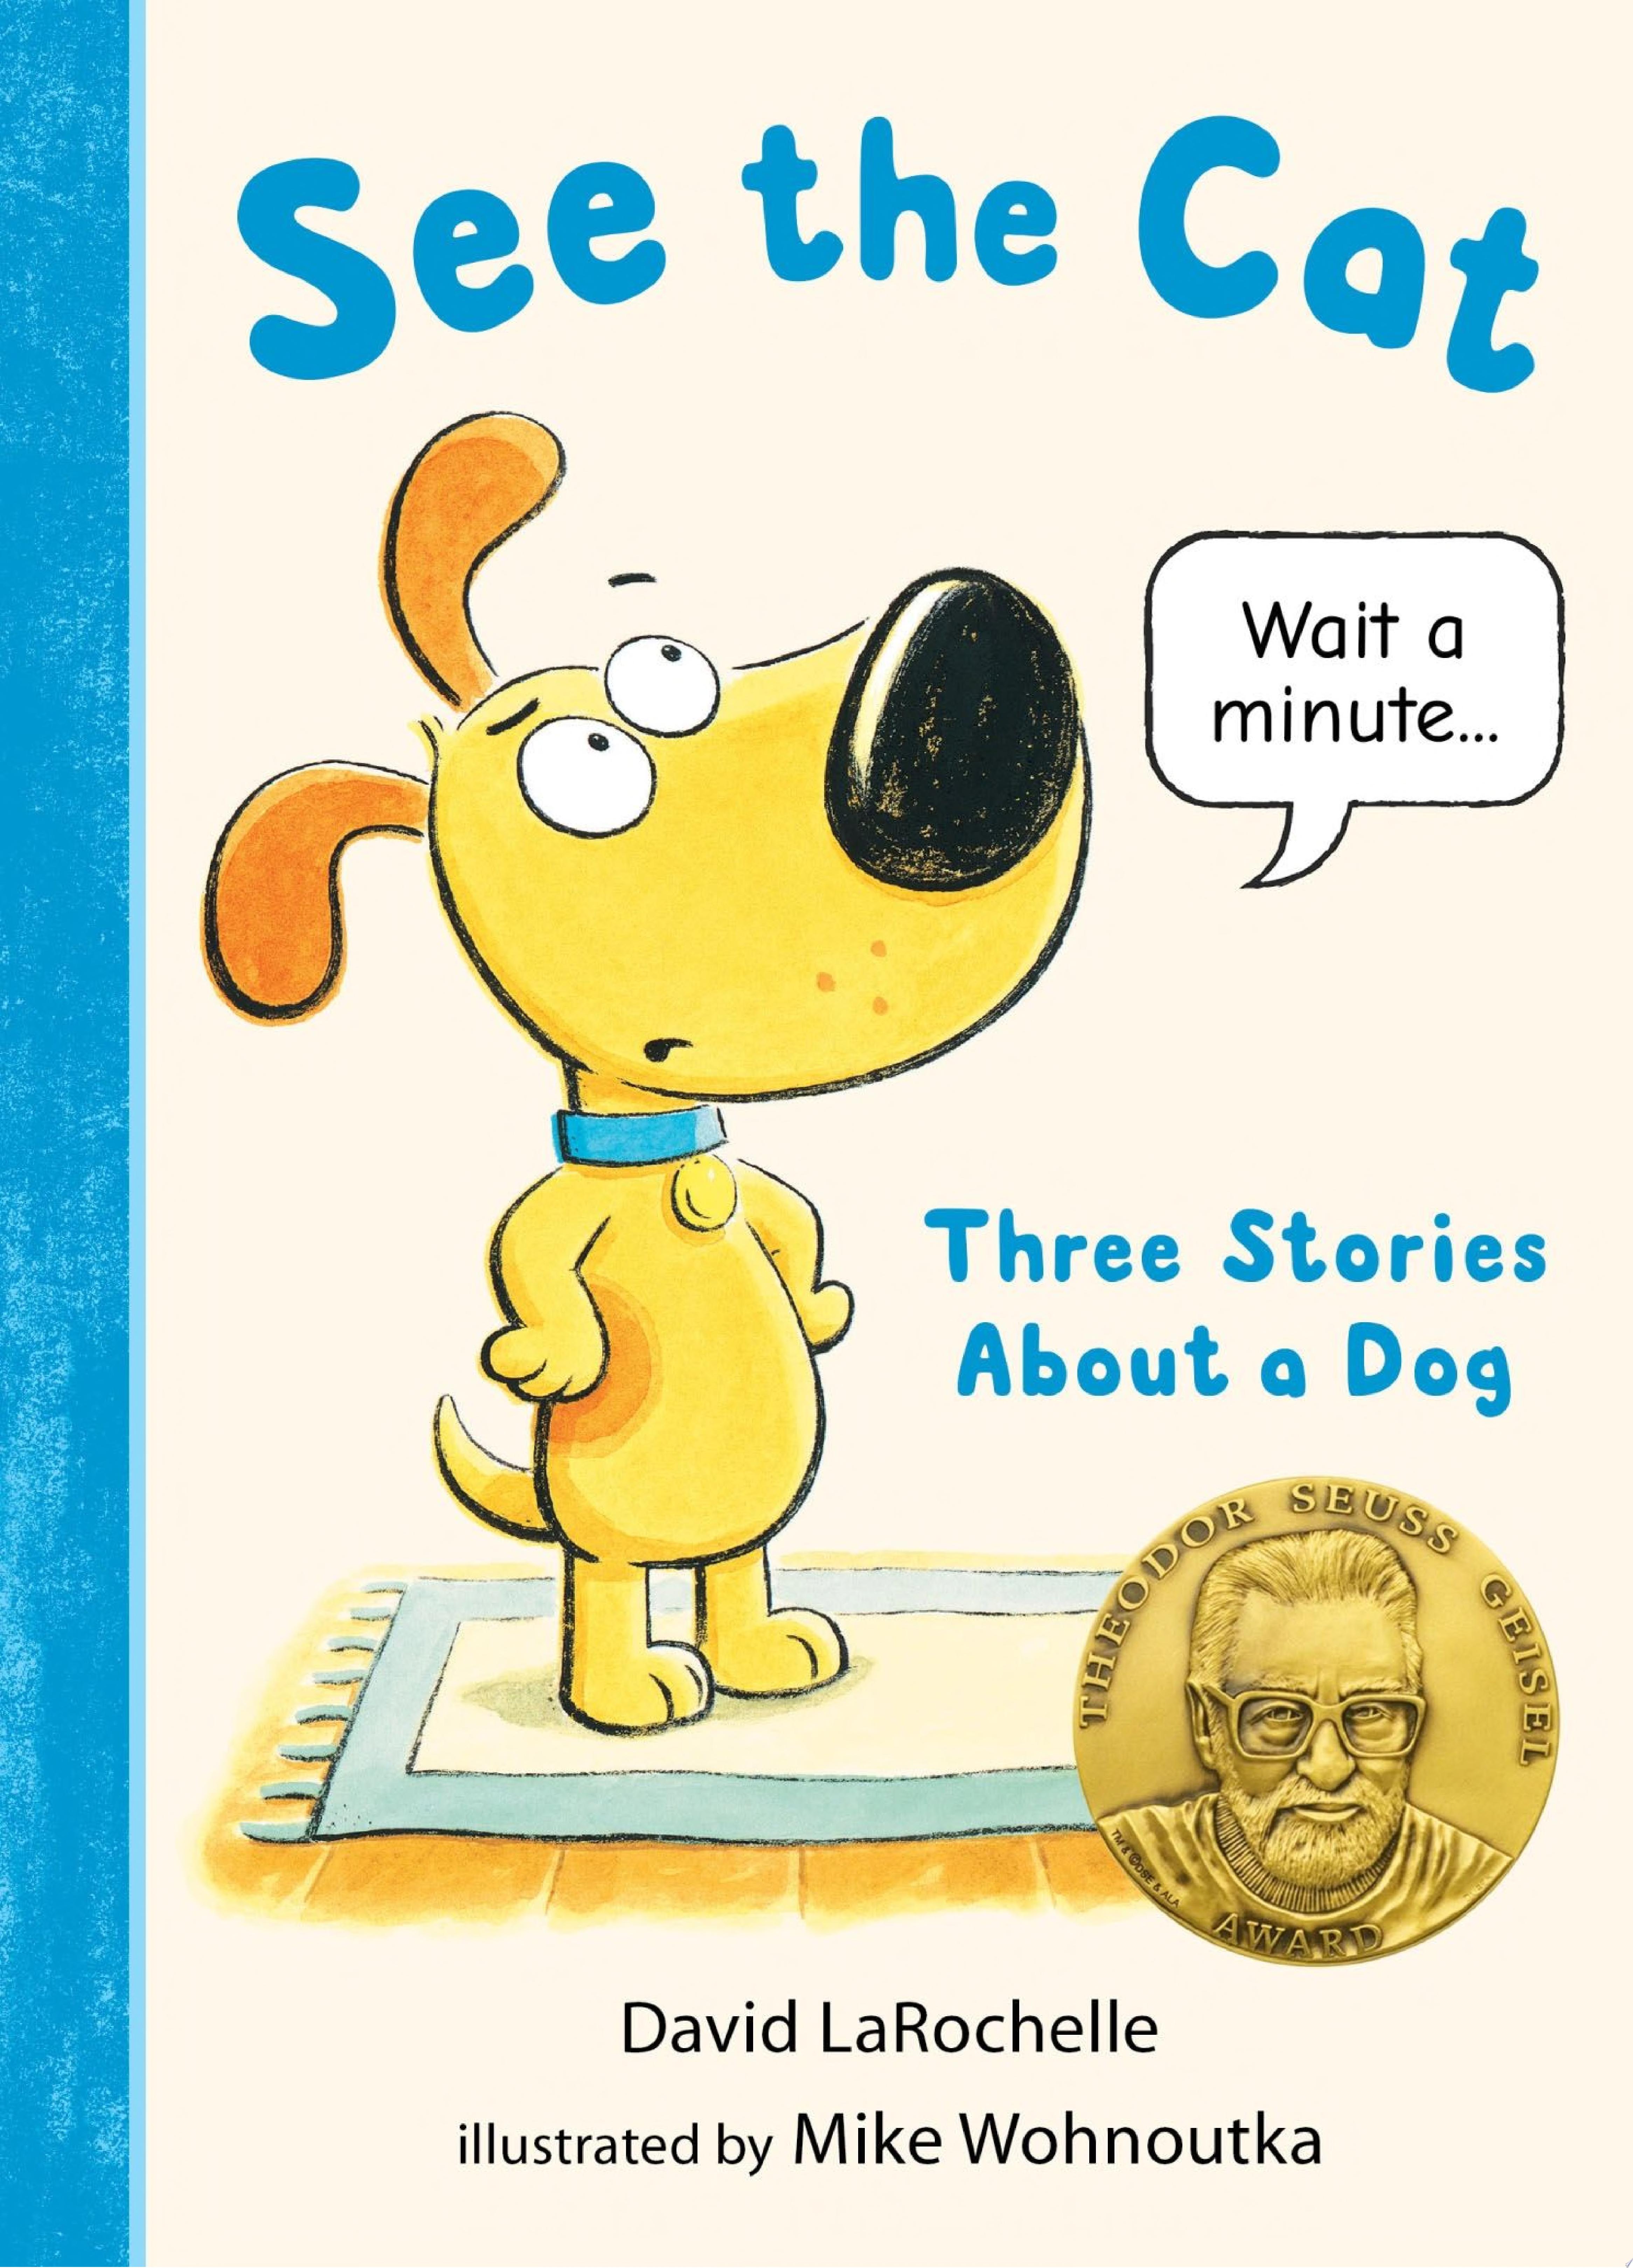 Image for "See the Cat: Three Stories About a Dog"